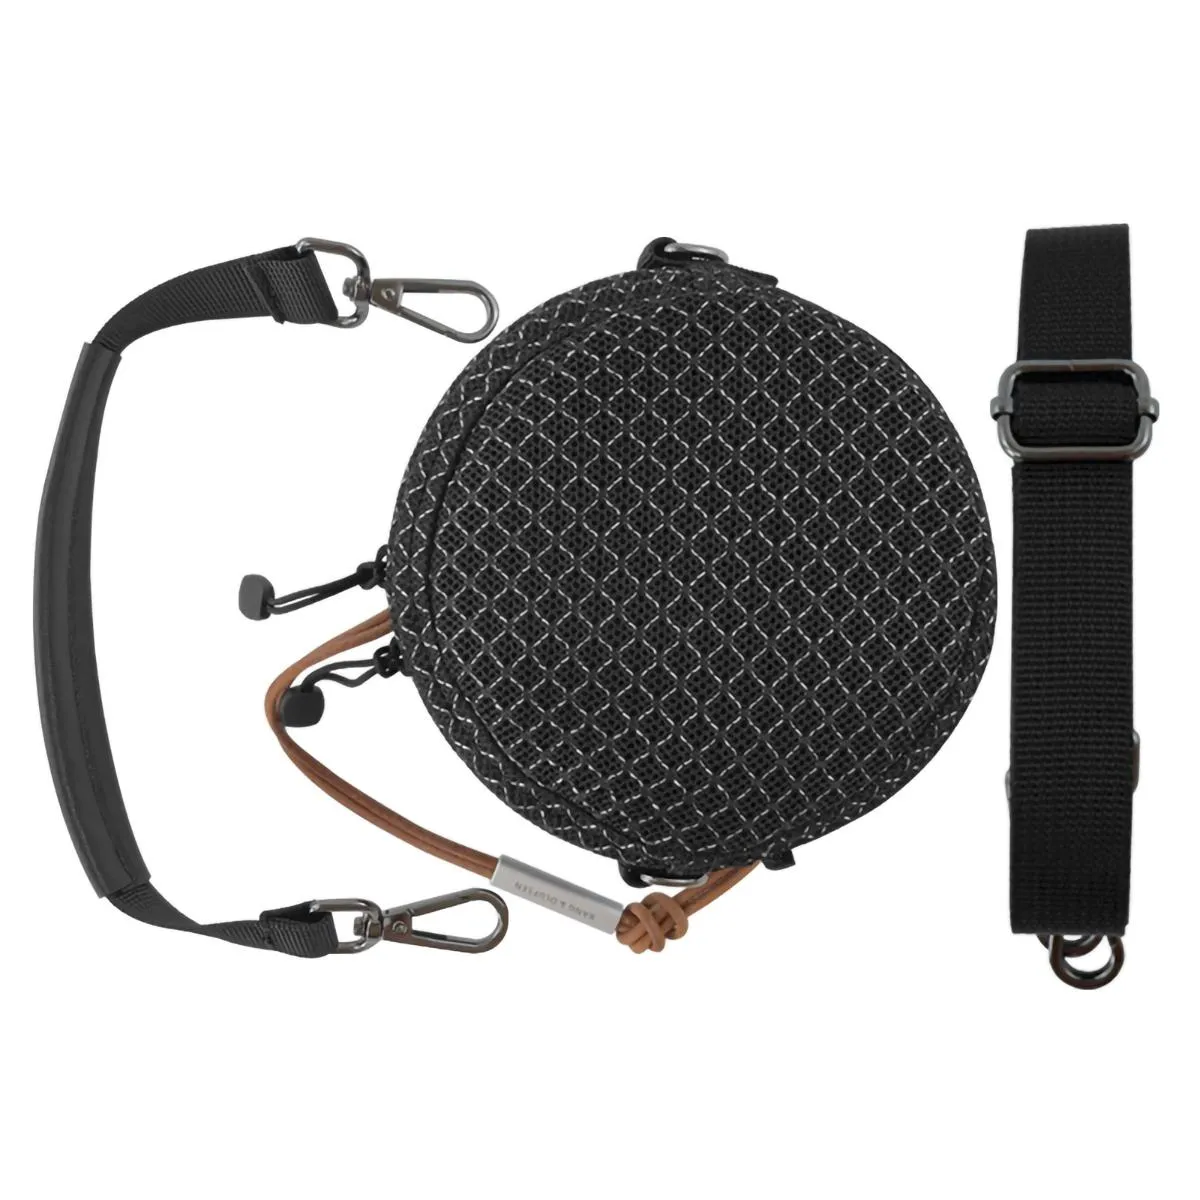 Speakers Mesh Bags for B O Beosound A1 2nd Speaker Sound Transparent Bag Outdoor Portable Beoplay A1 Bluetooth Speaker Travel Carry Case